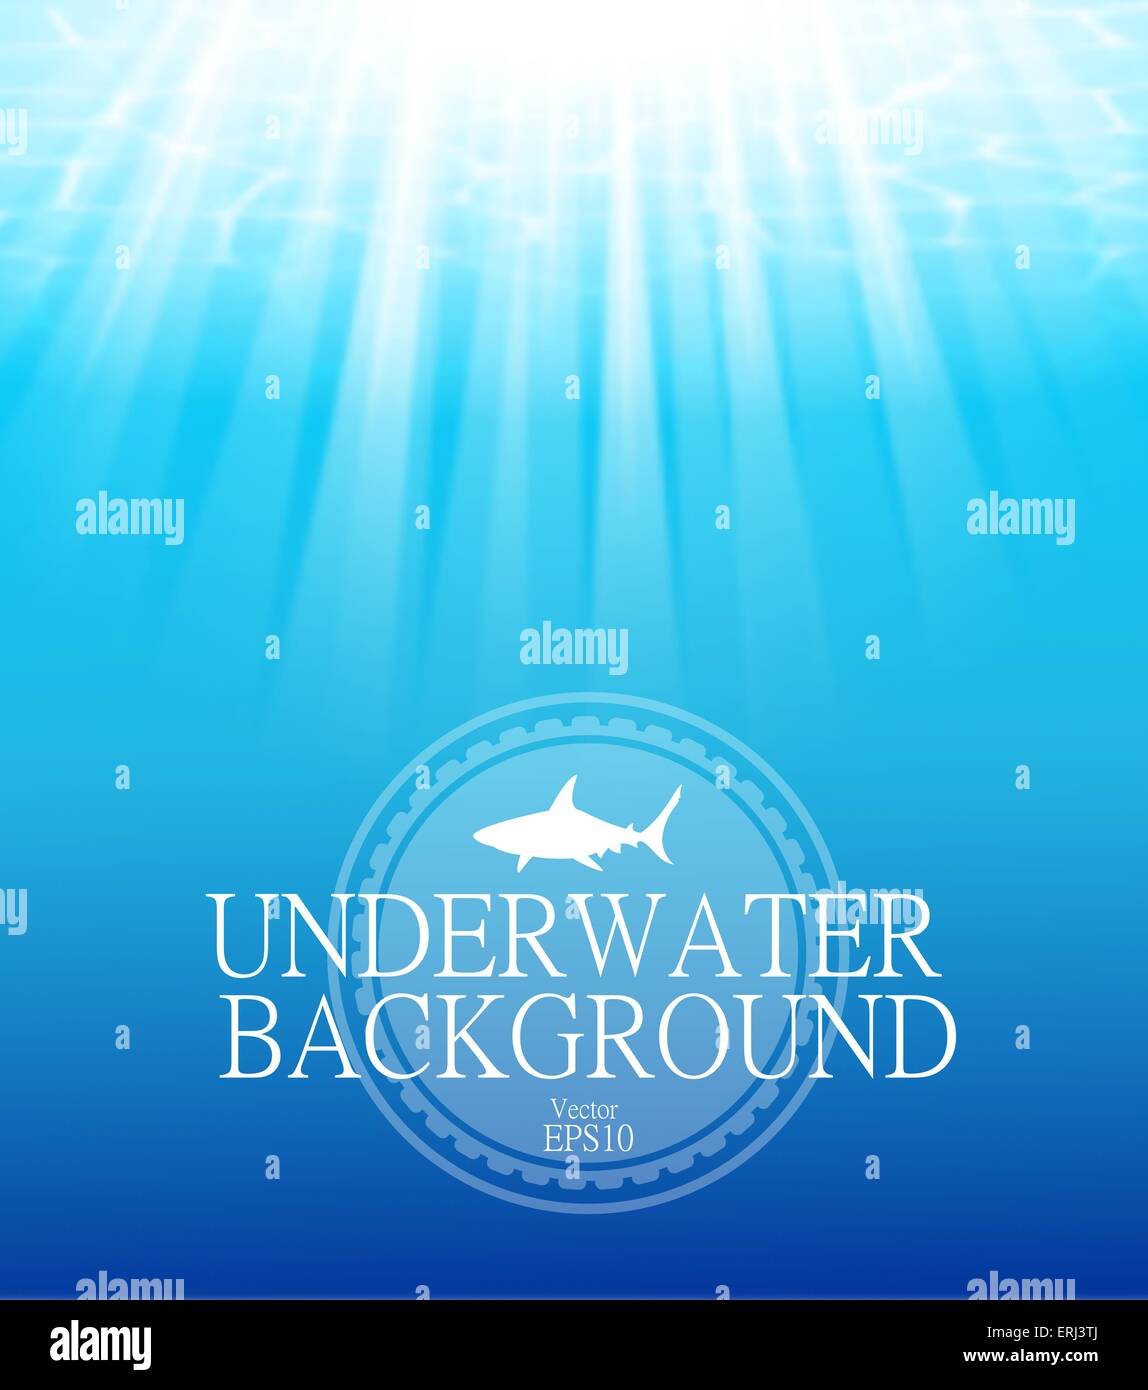 Blurred underwater background with sunbeams. Vector illustration EPS 10. Stock Vector